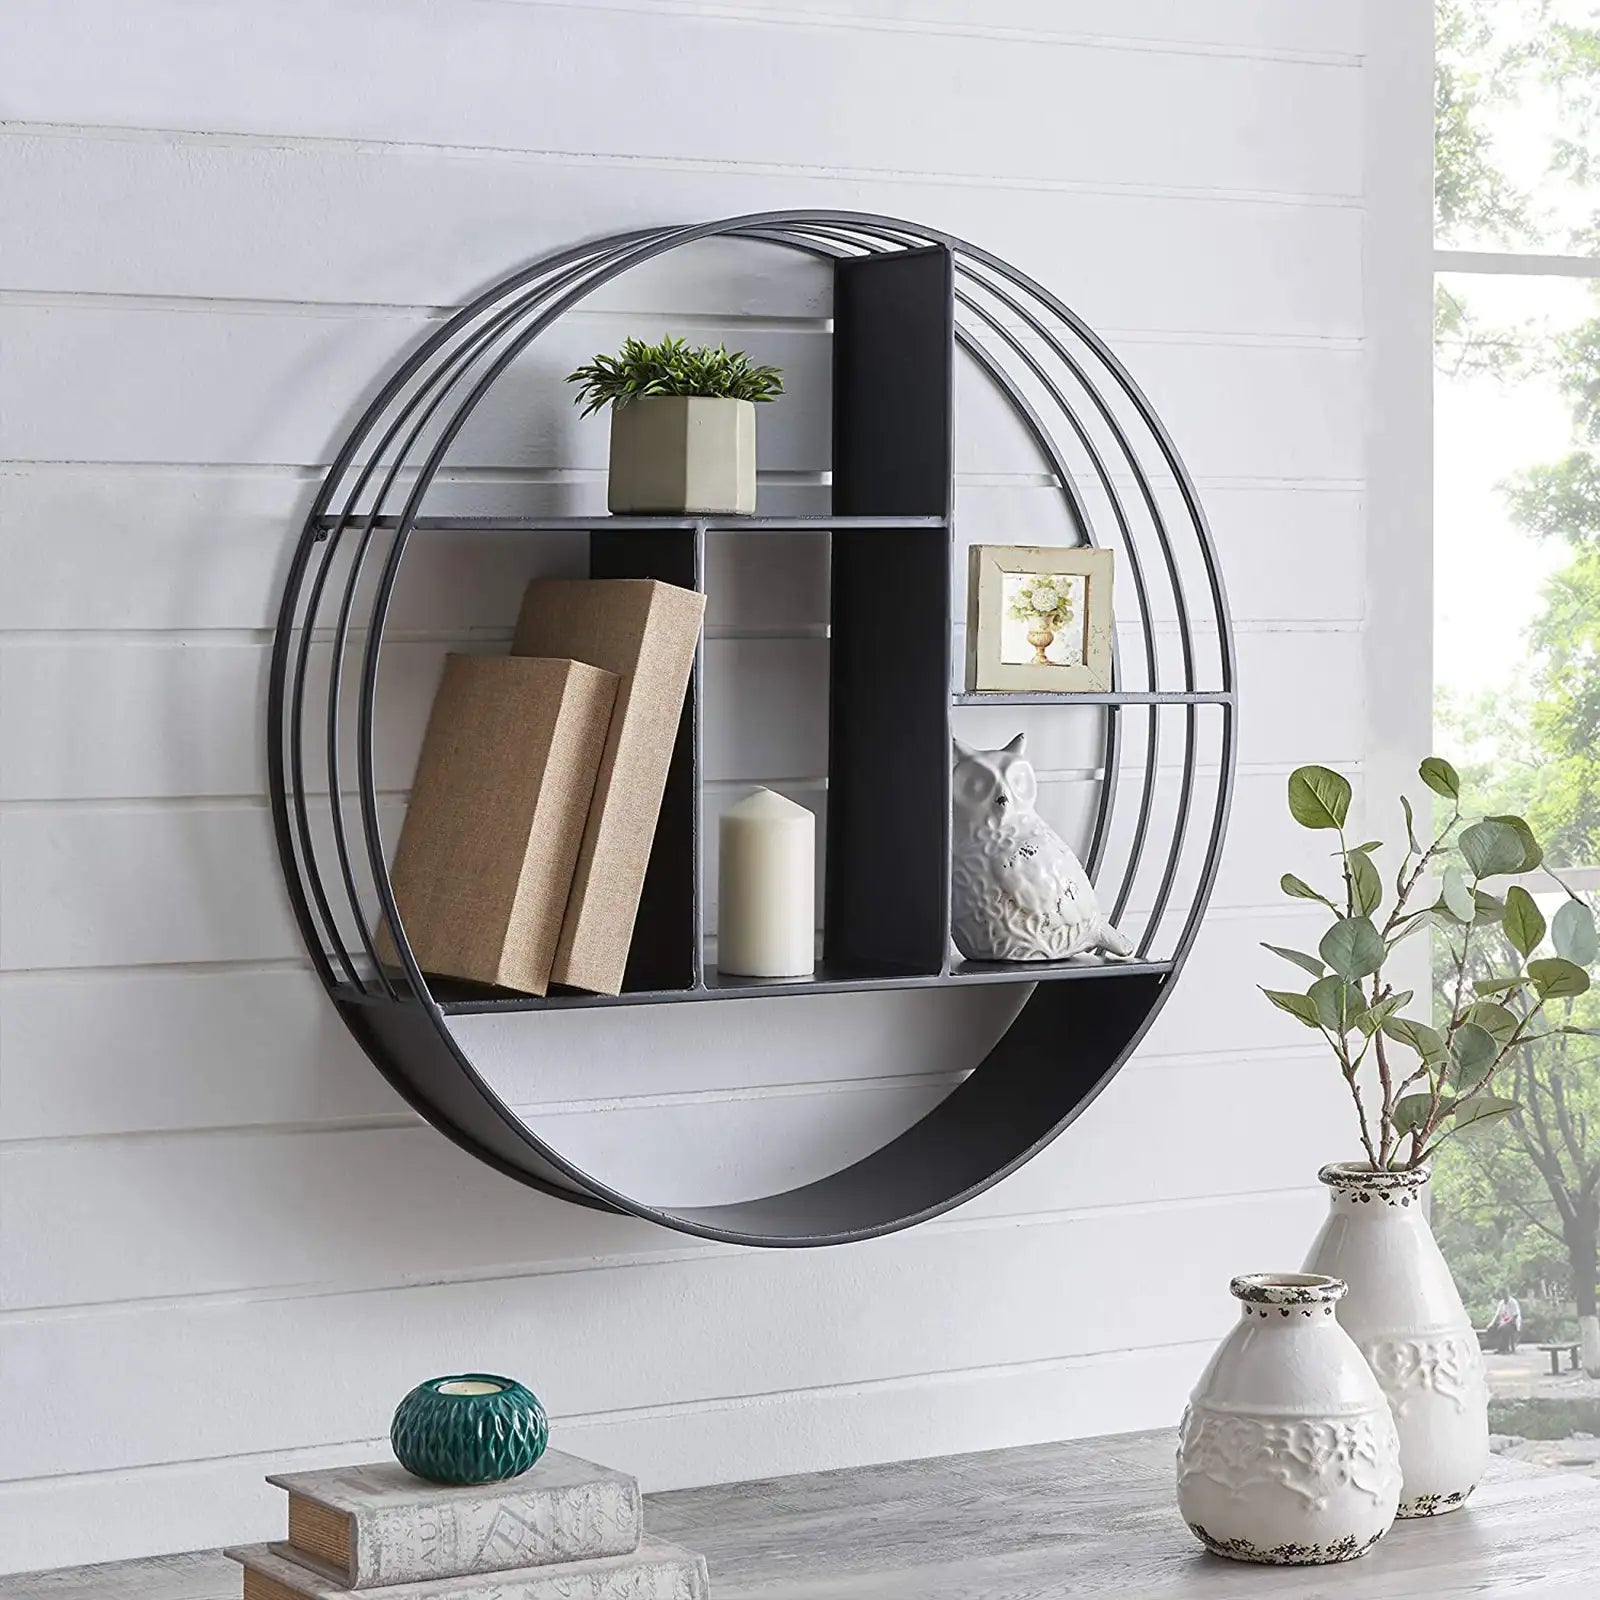 Brody Wall Shelf, Round 3 Tier Wall Mounted Floating Shelf for Bathroom, Bedroom, Living Room Decor, Metal, Industrial, 27.5 inches